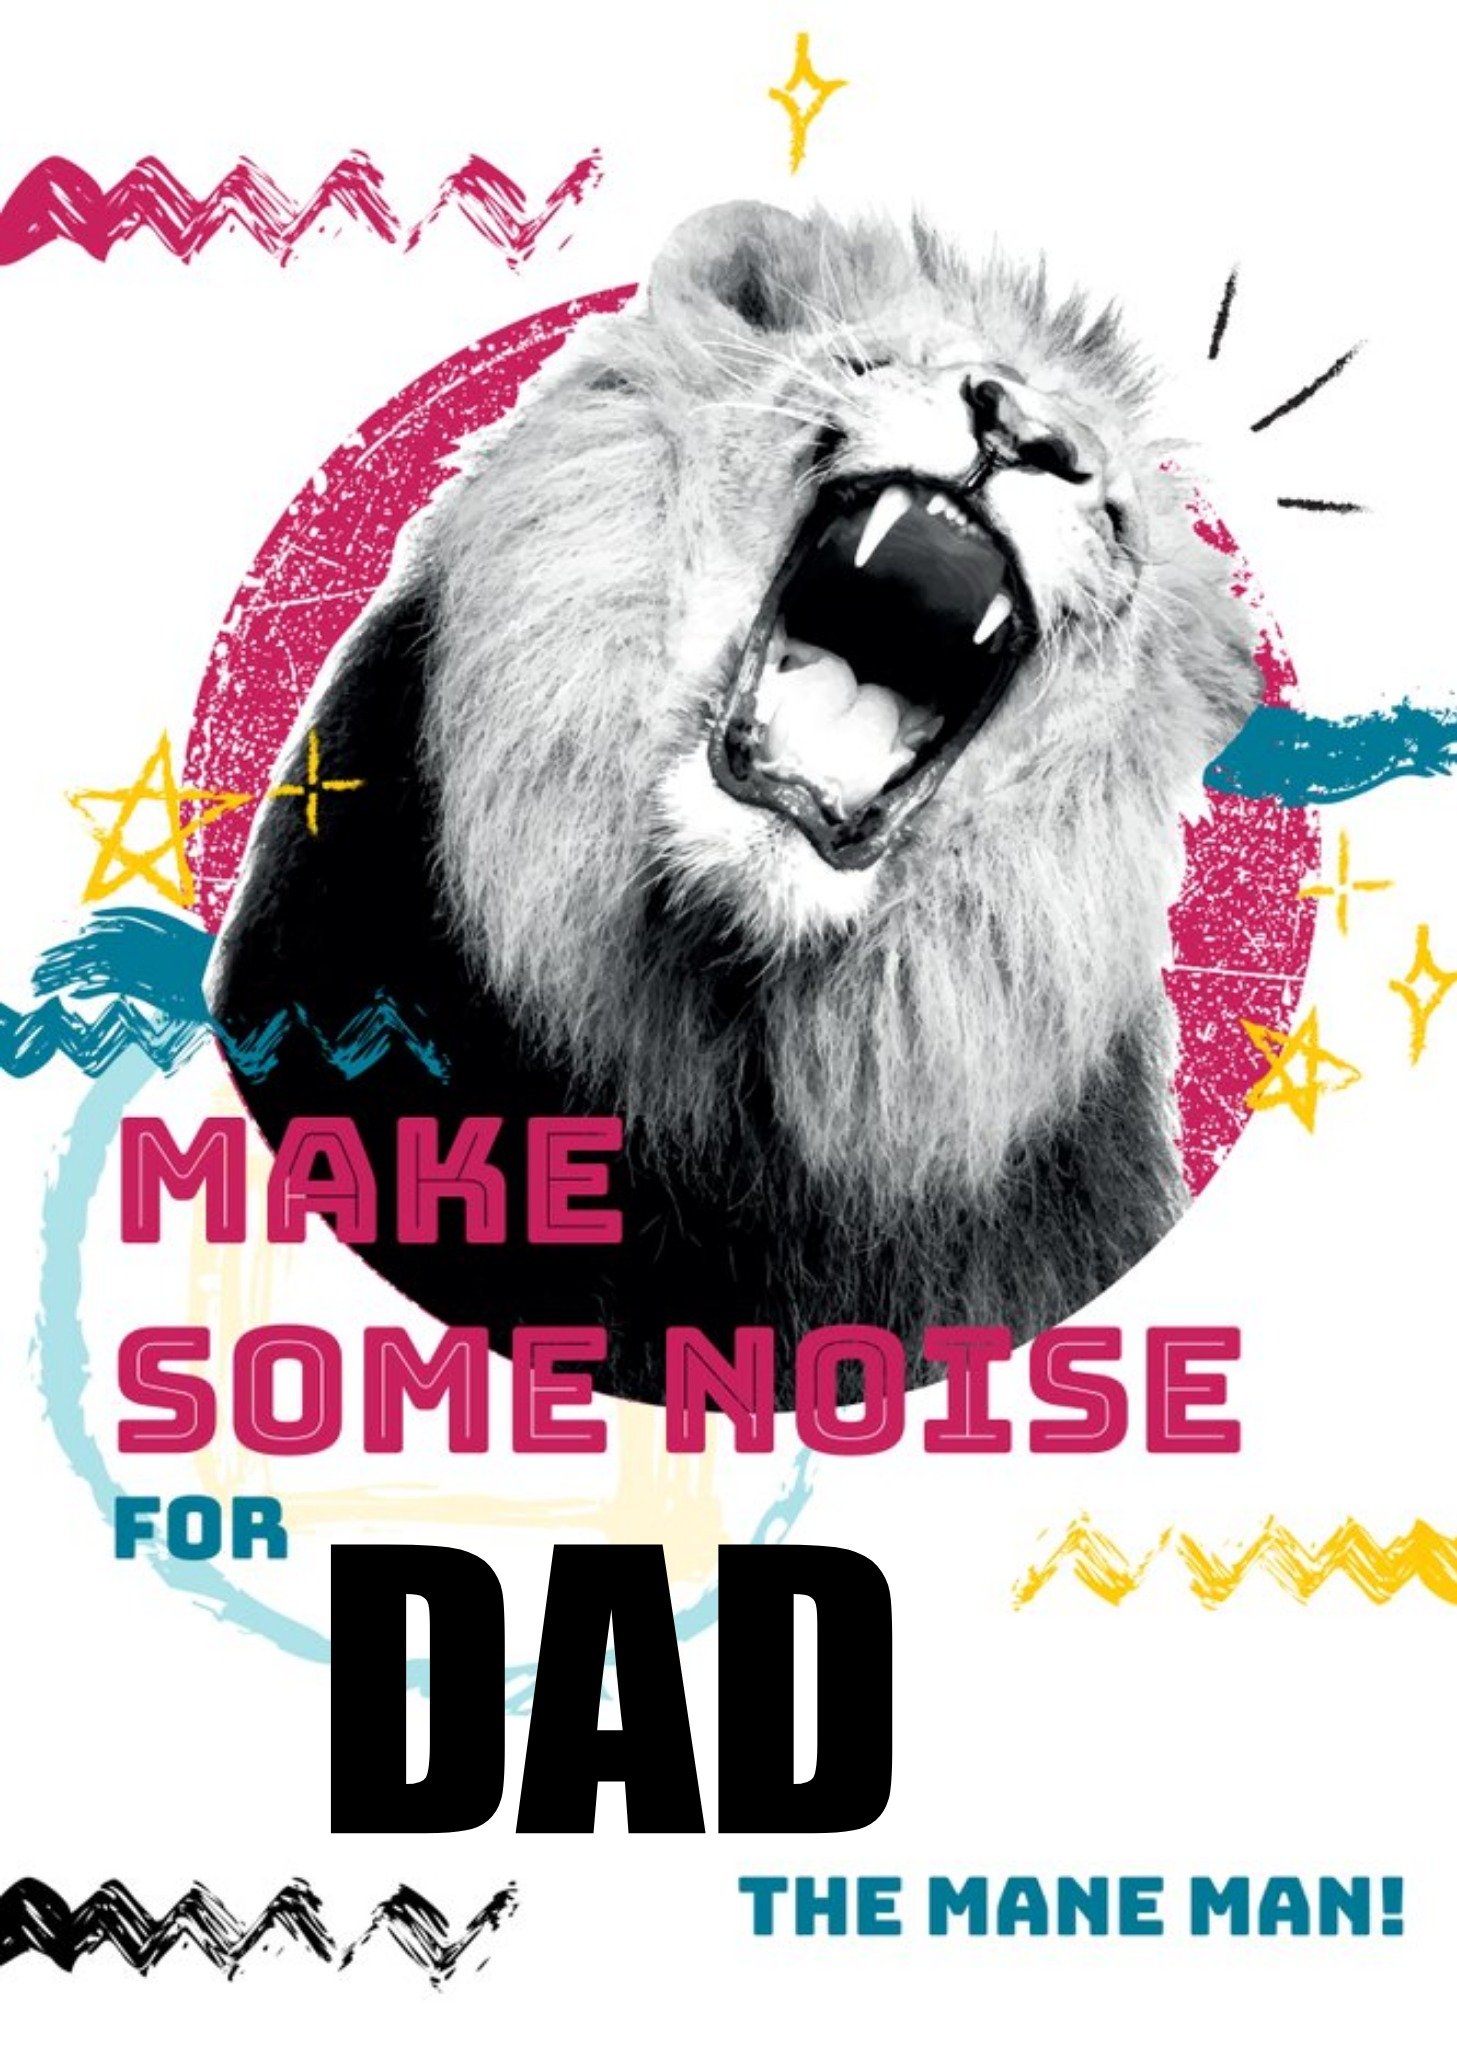 Moonpig Animal Planet Make Some Noise For Dad Lion Father's Day Card Ecard